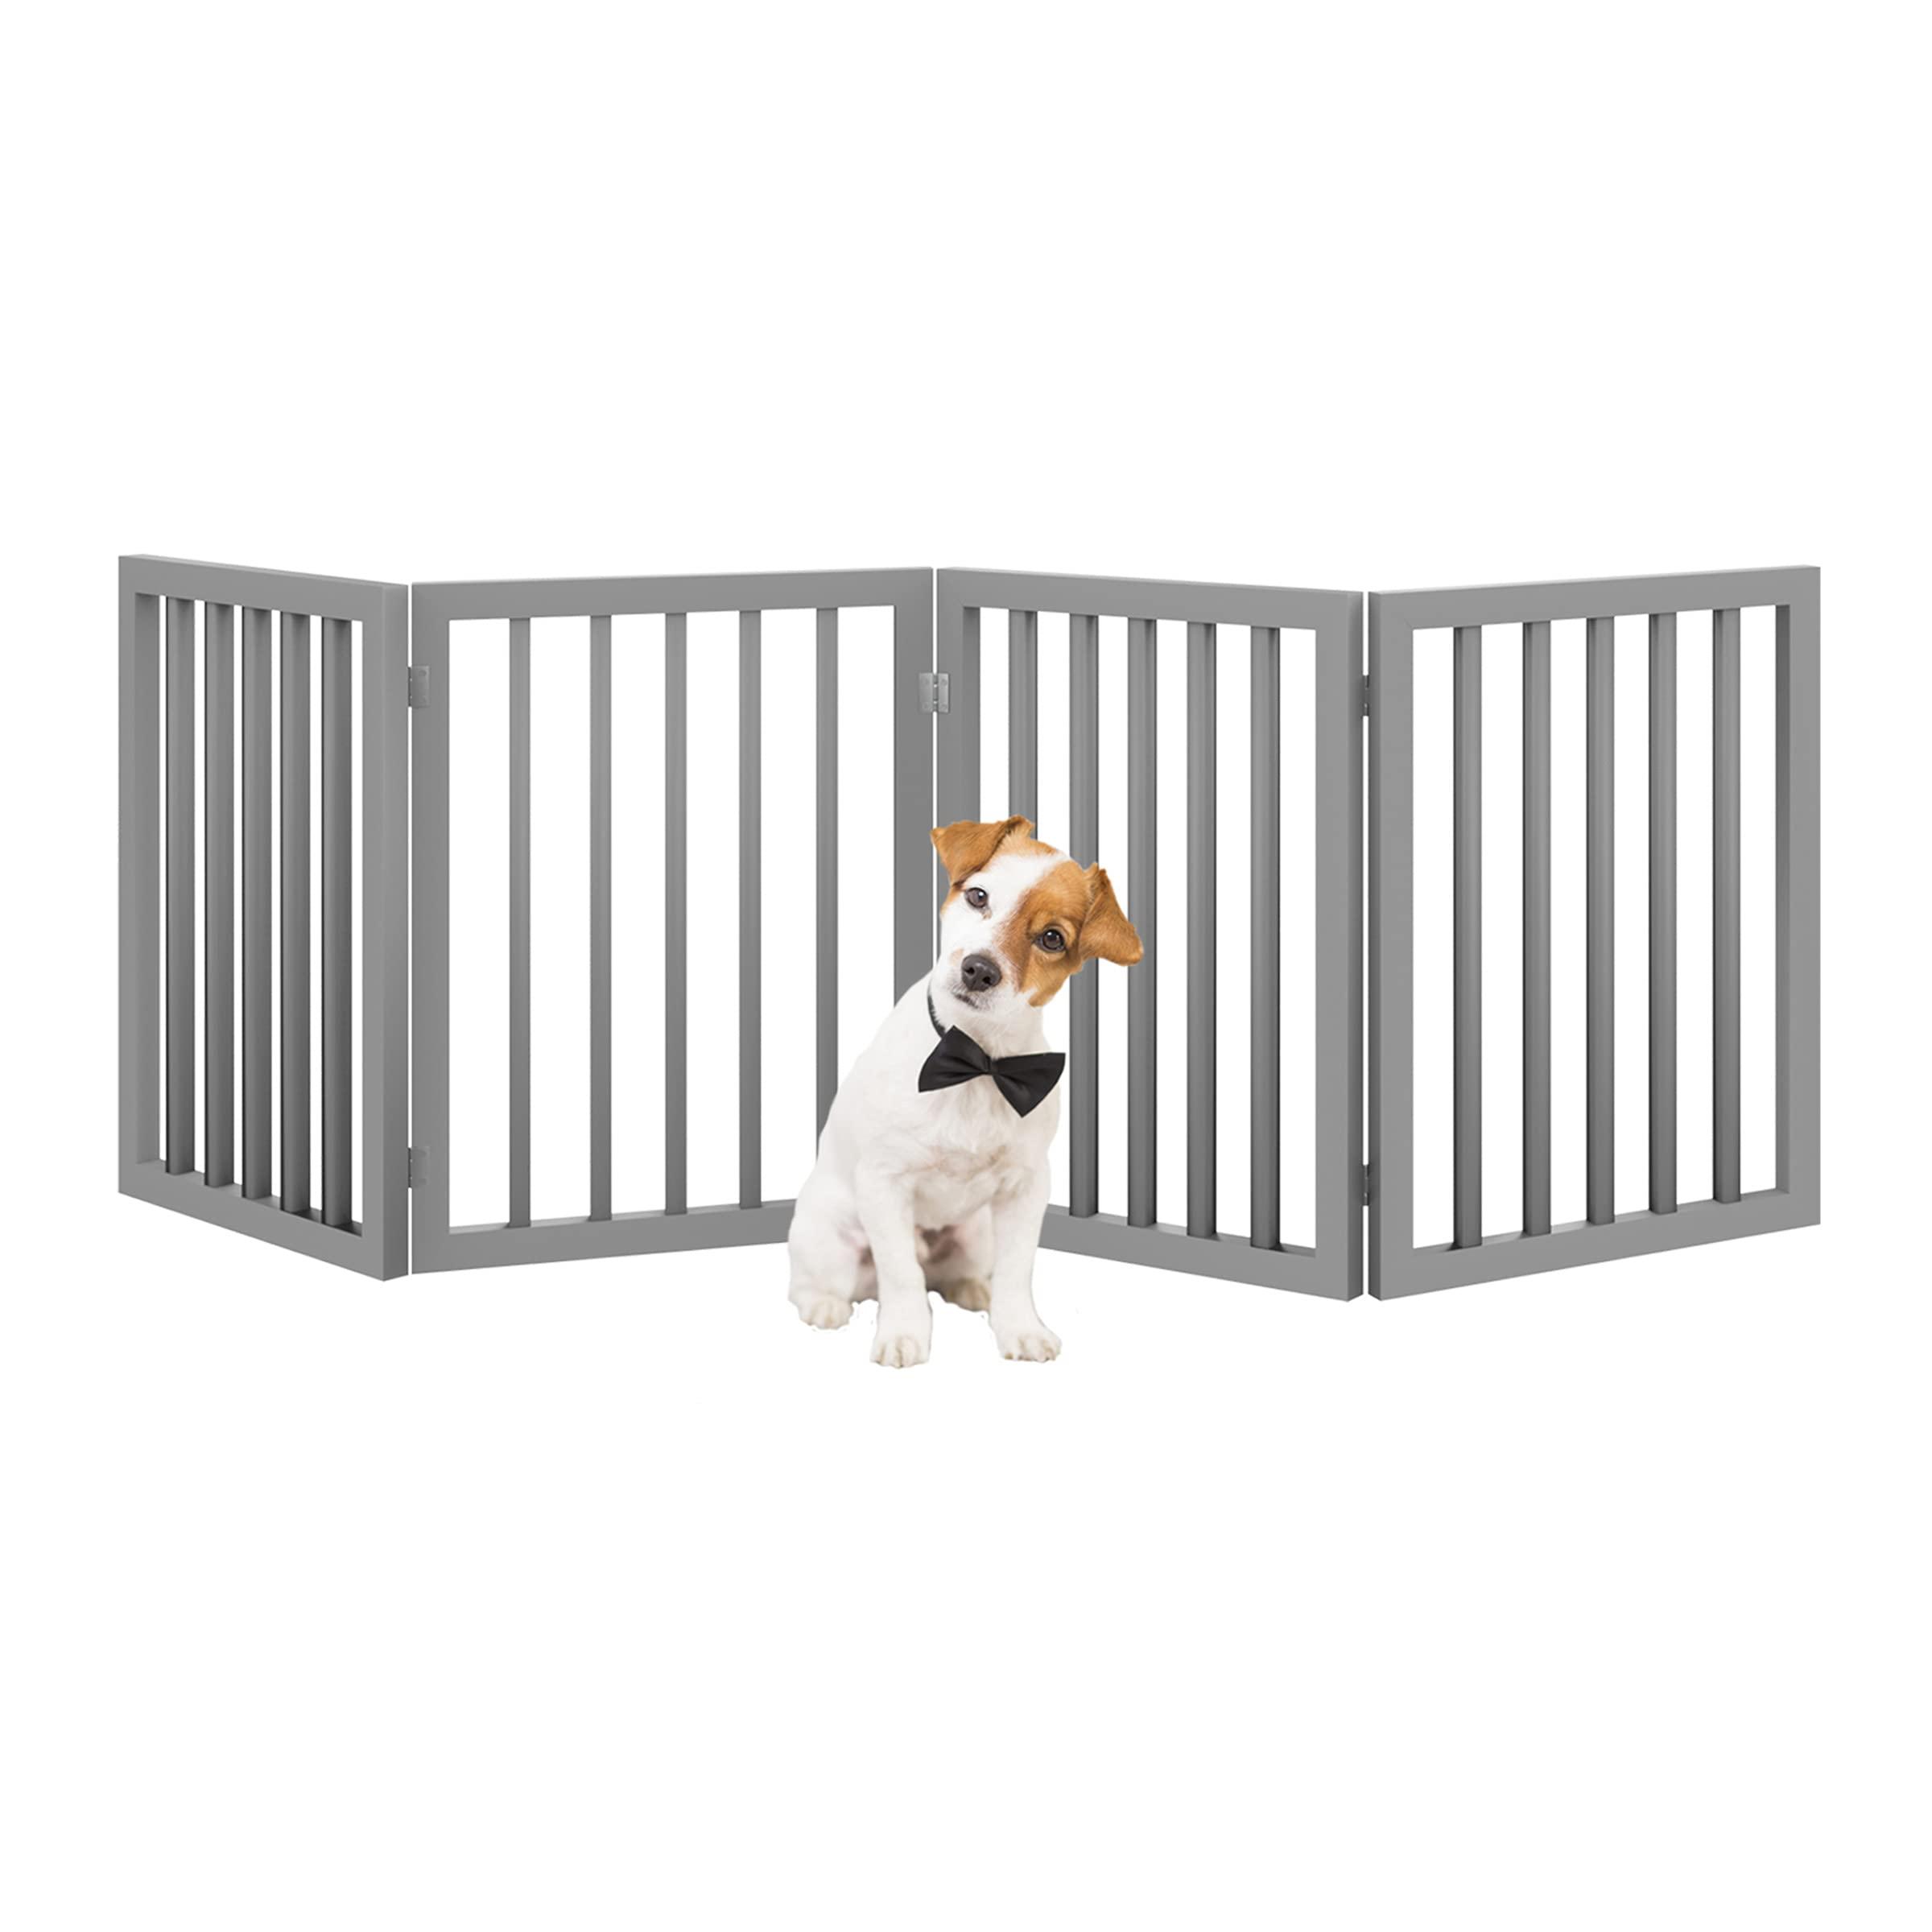 PETMAKER Pet Gate - Dog Gate for Doorways, Stairs or House - Freestanding, Folding, Accordion Style, MDF Wooden Indoor Dog Fence (4 Panel, Gray)